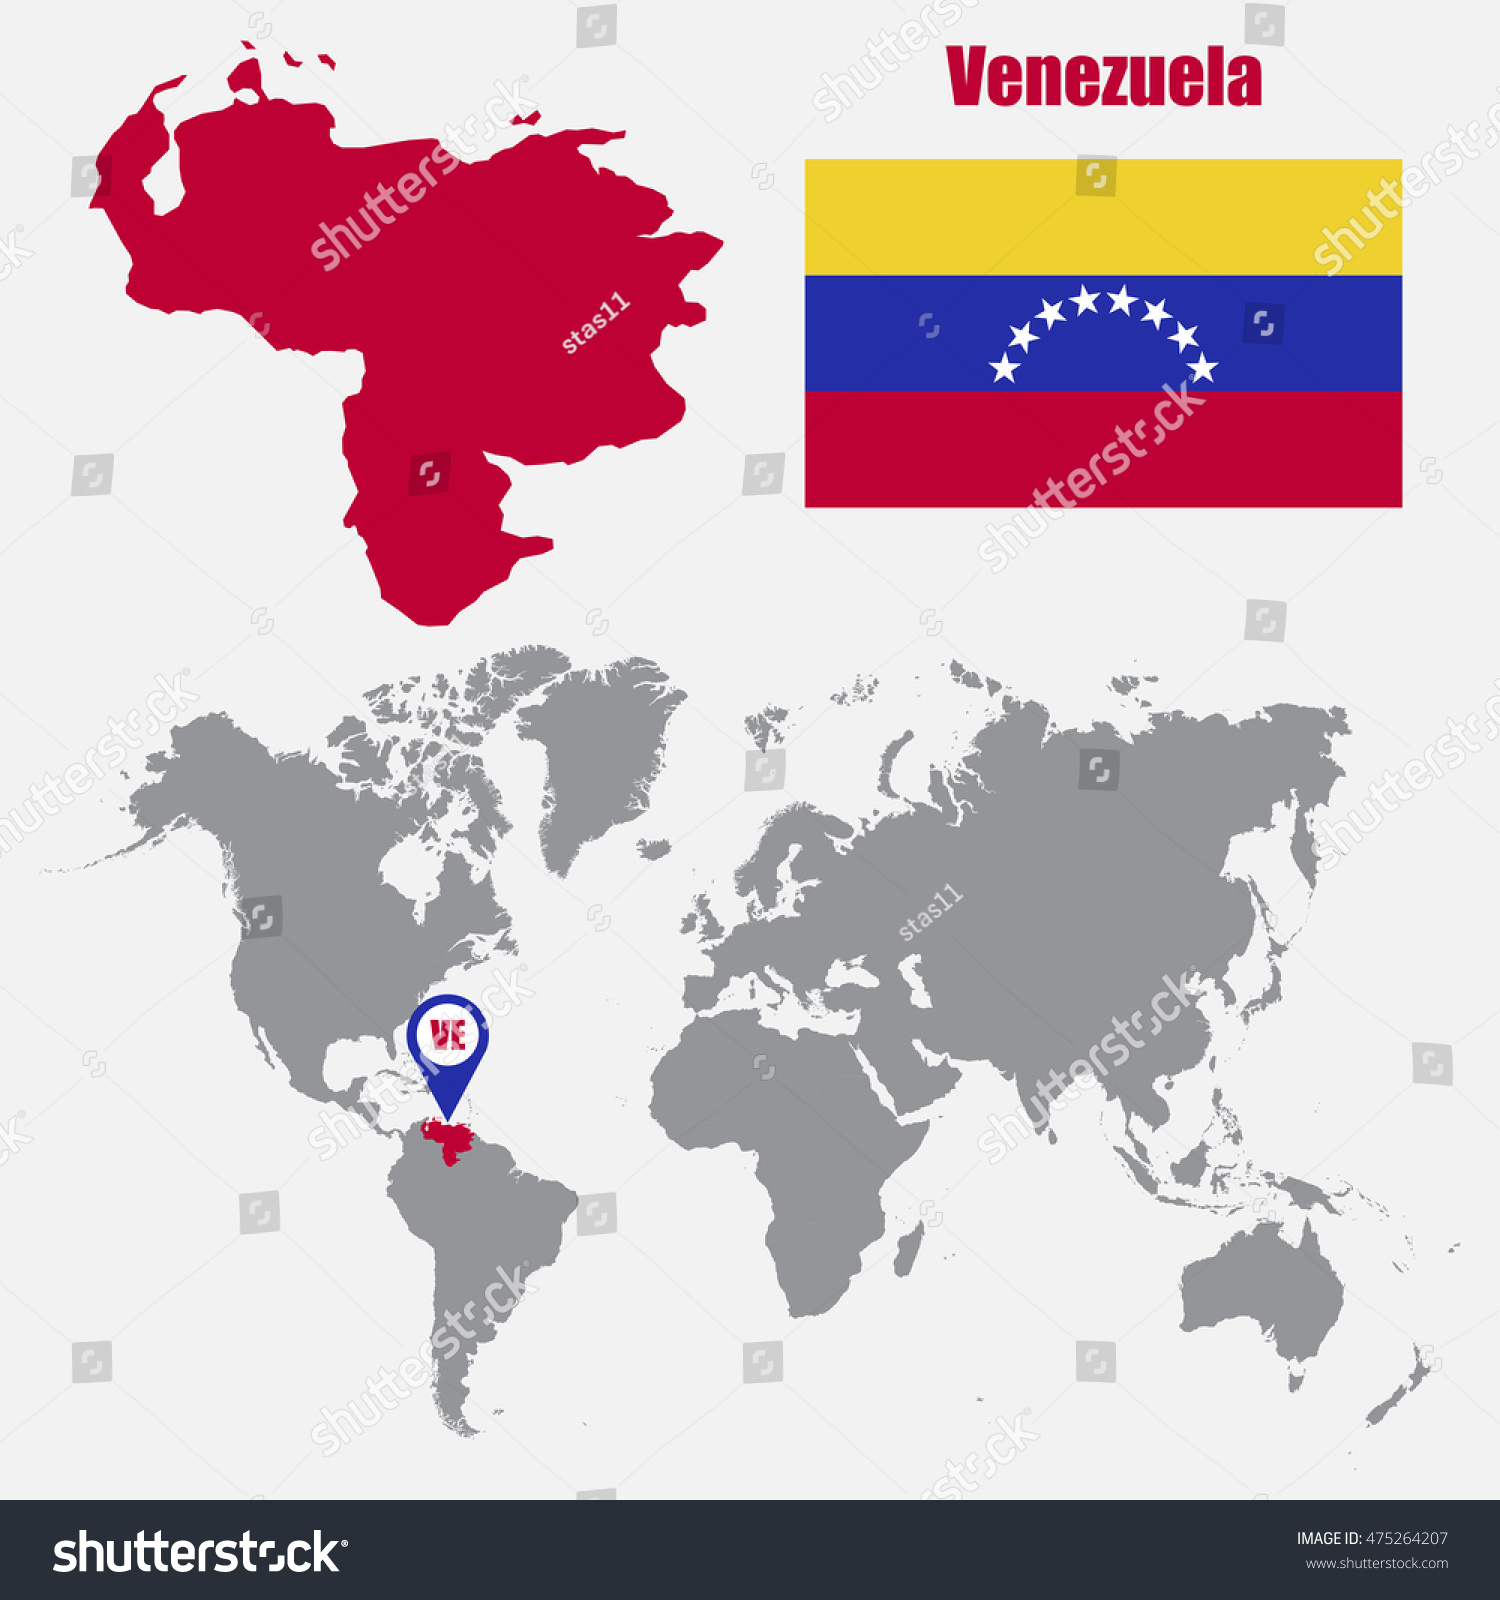 Venezuela Map On A World Map With Flag And Map Royalty Free Stock